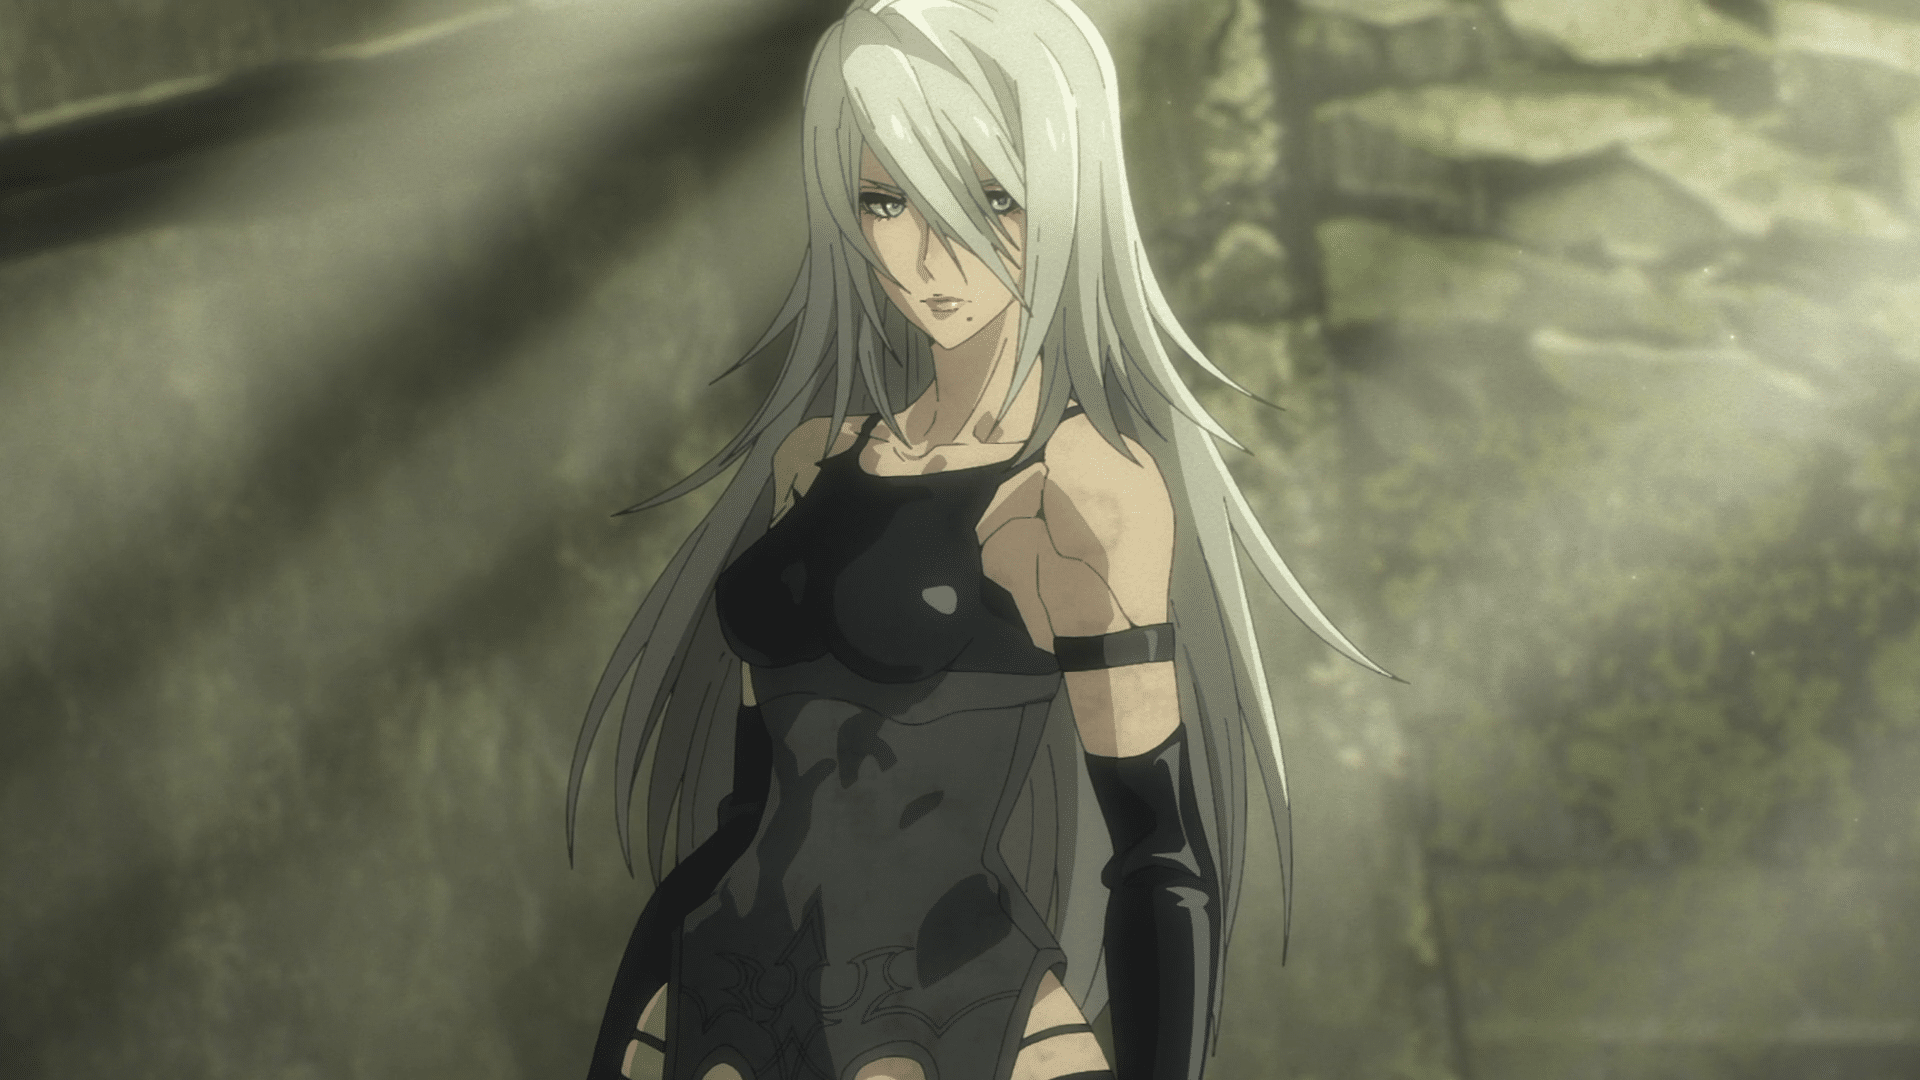 NieR:Automata Ver  Anime English Dub Starting This Week; Cast  Announced, Includes Voices From The Game - Noisy Pixel